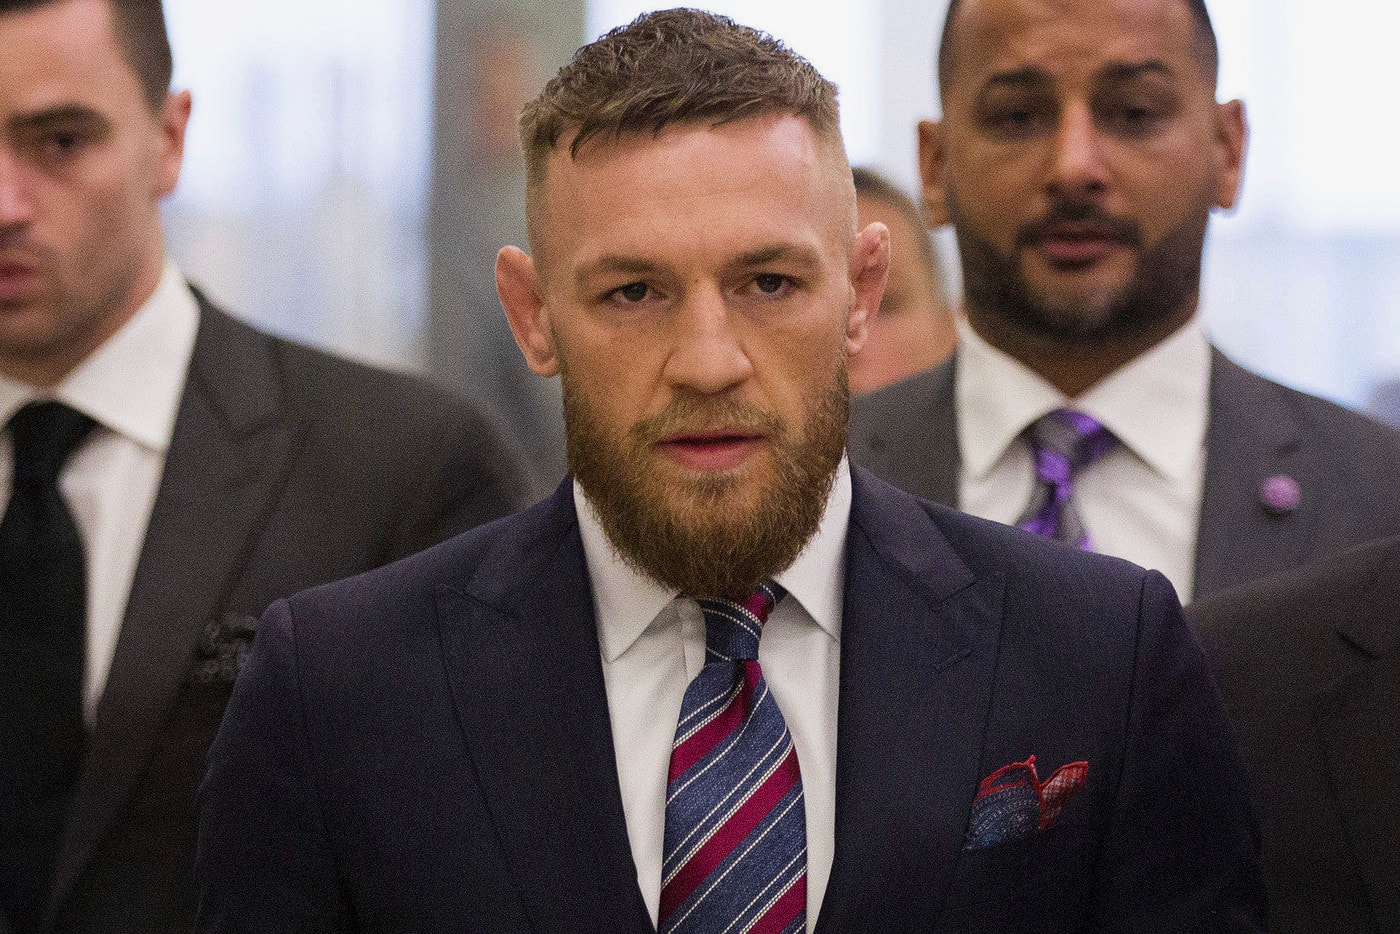 Conor McGregor Michael Chiesa UFC 223 Attack Sued Bus lawsuit fighter Brooklyn Barclays Center